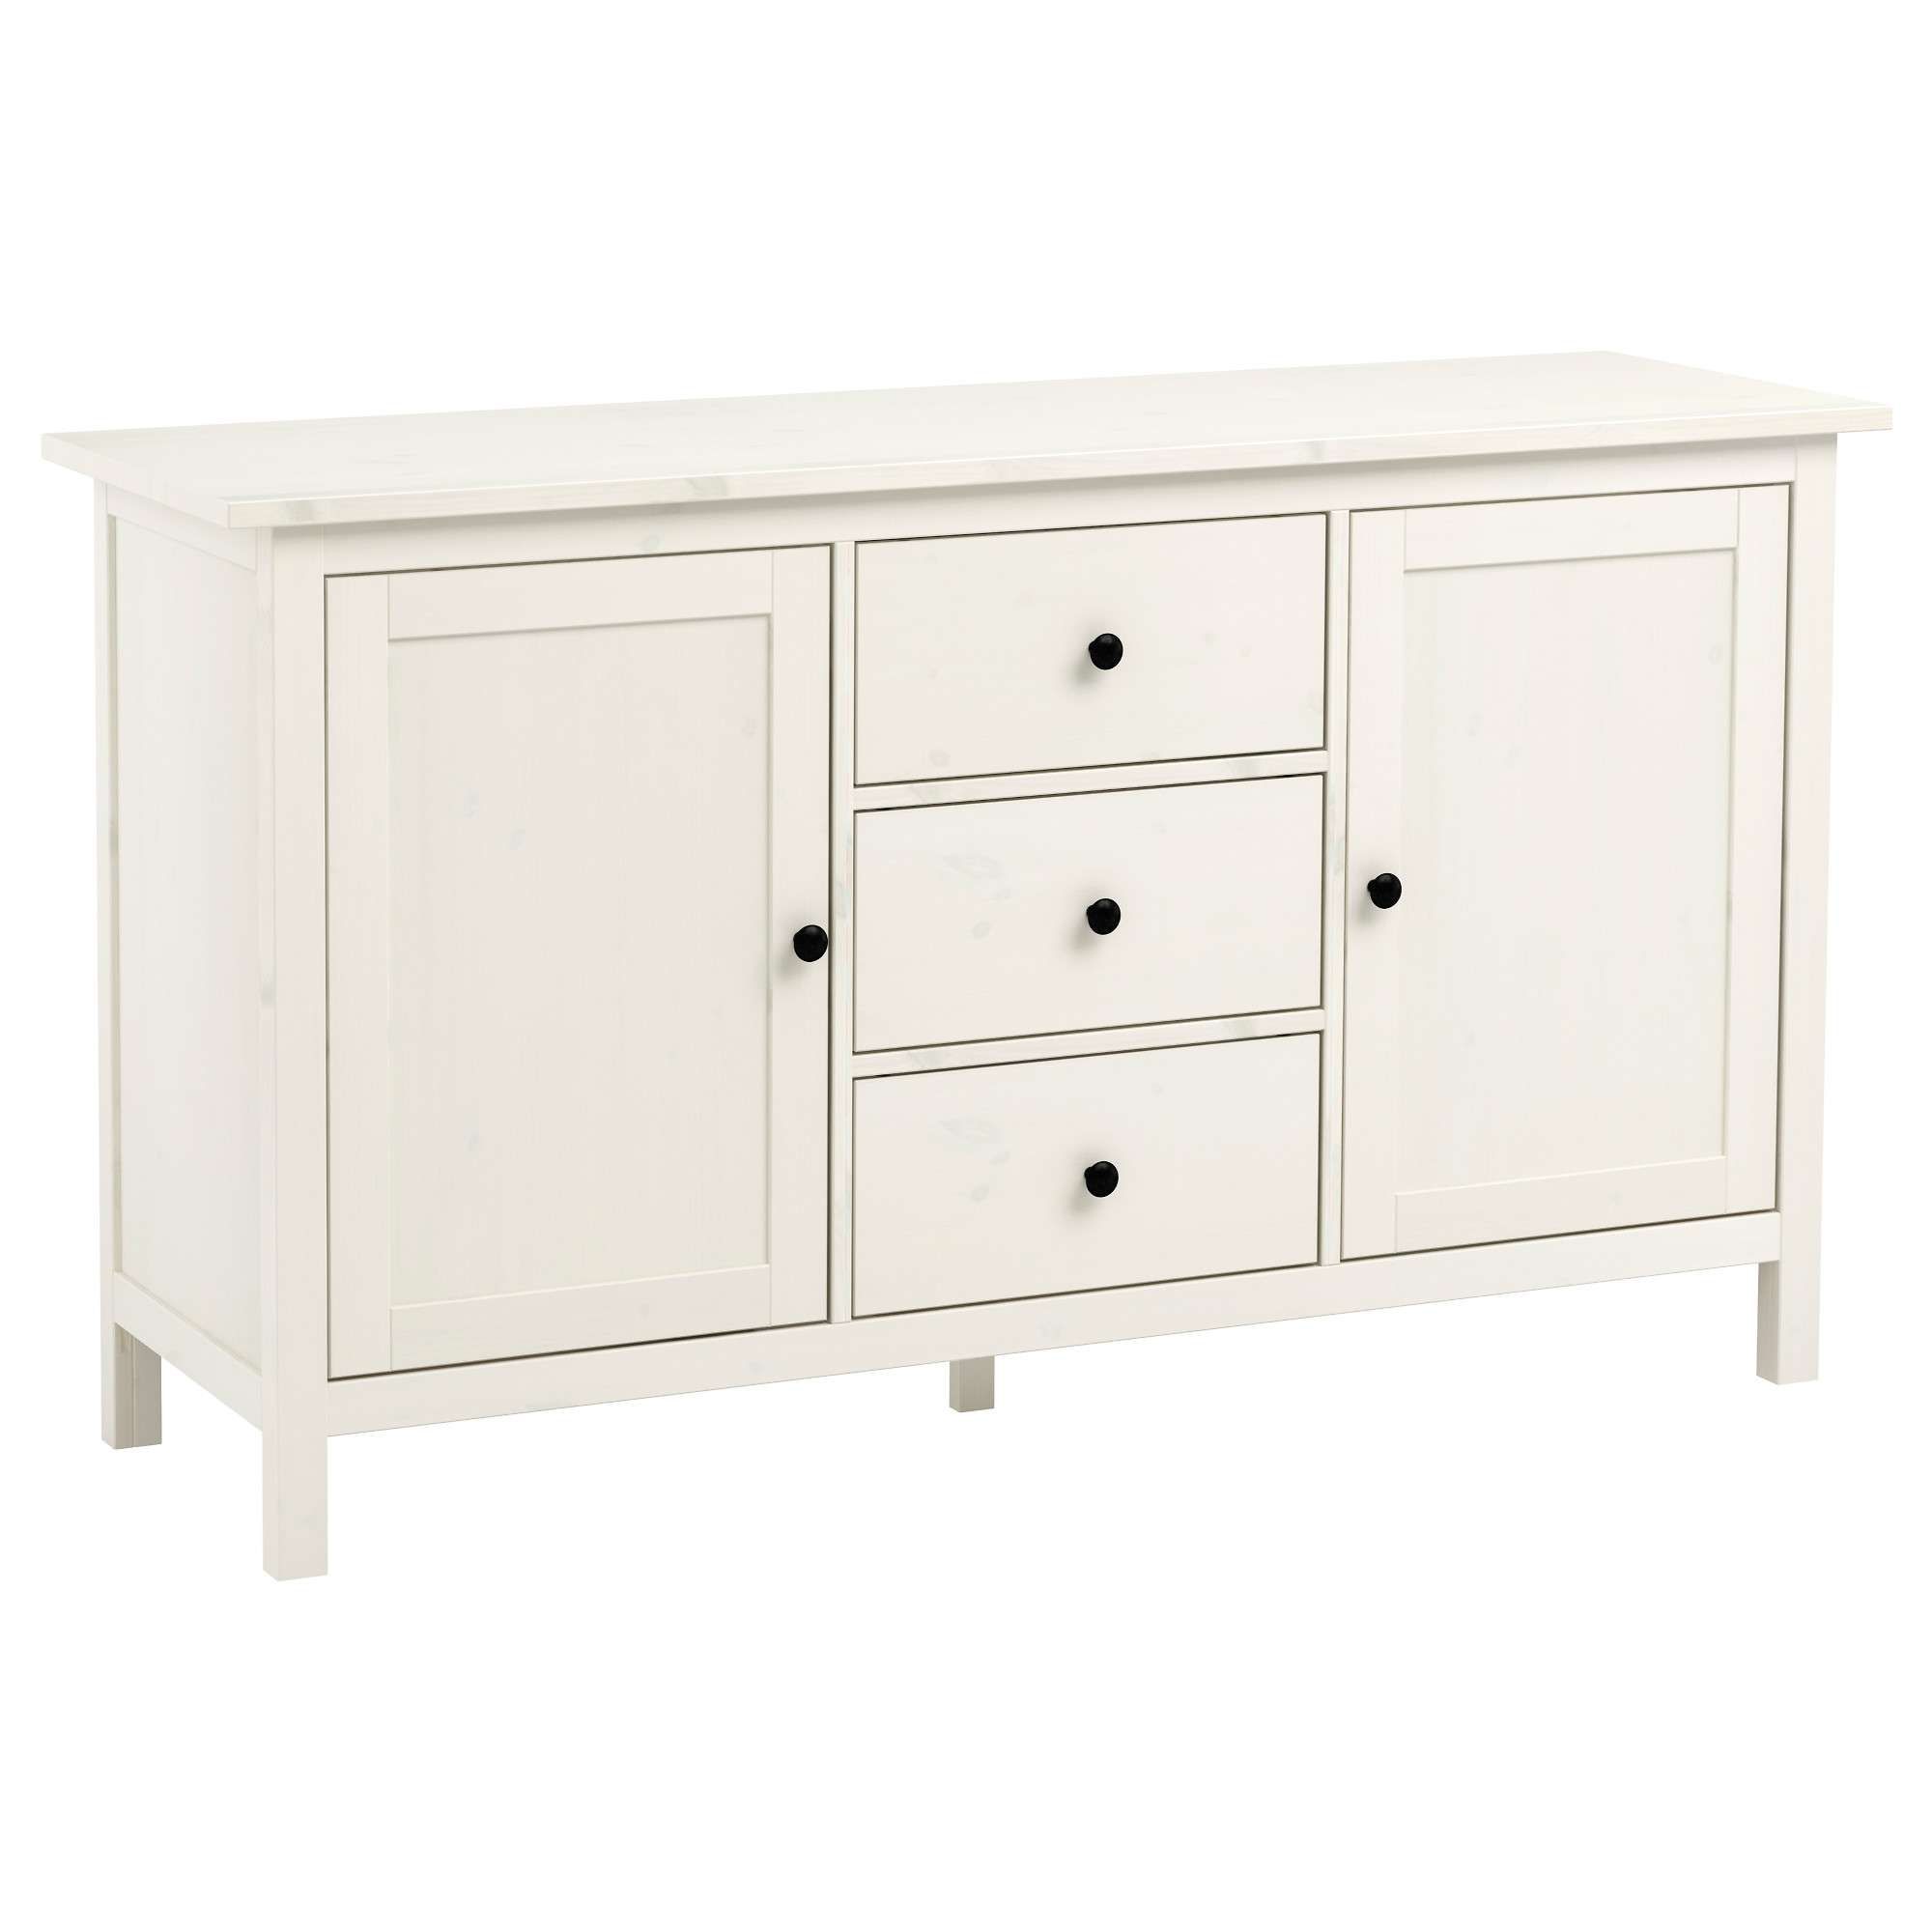 Hemnes Sideboard – White Stain – Ikea In Off White Sideboards (View 1 of 20)